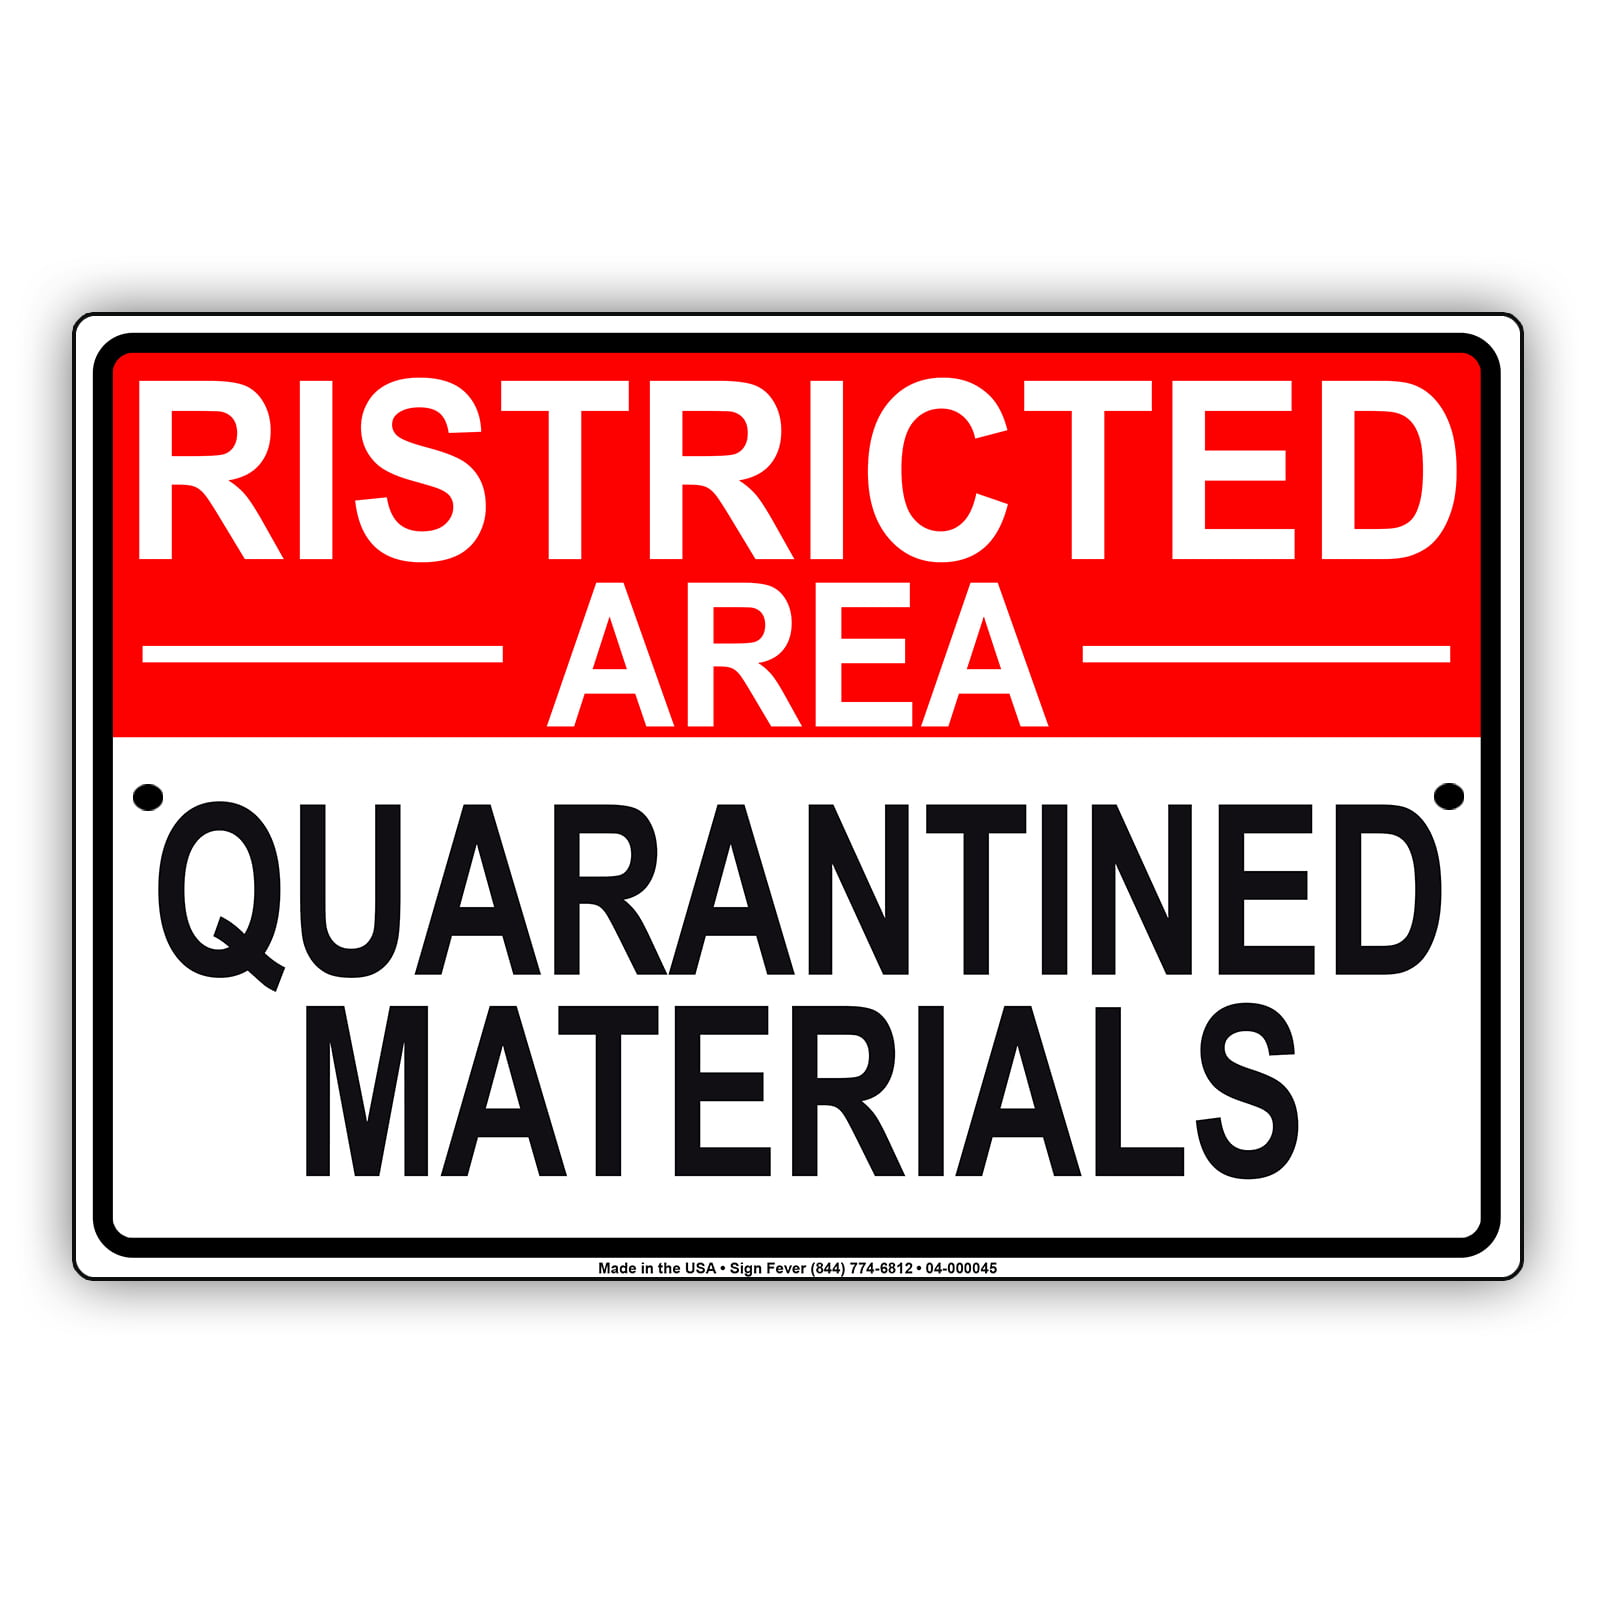 Warning "This Sign Is Only A Distraction" 8" x 12" Aluminum Metal Sign 